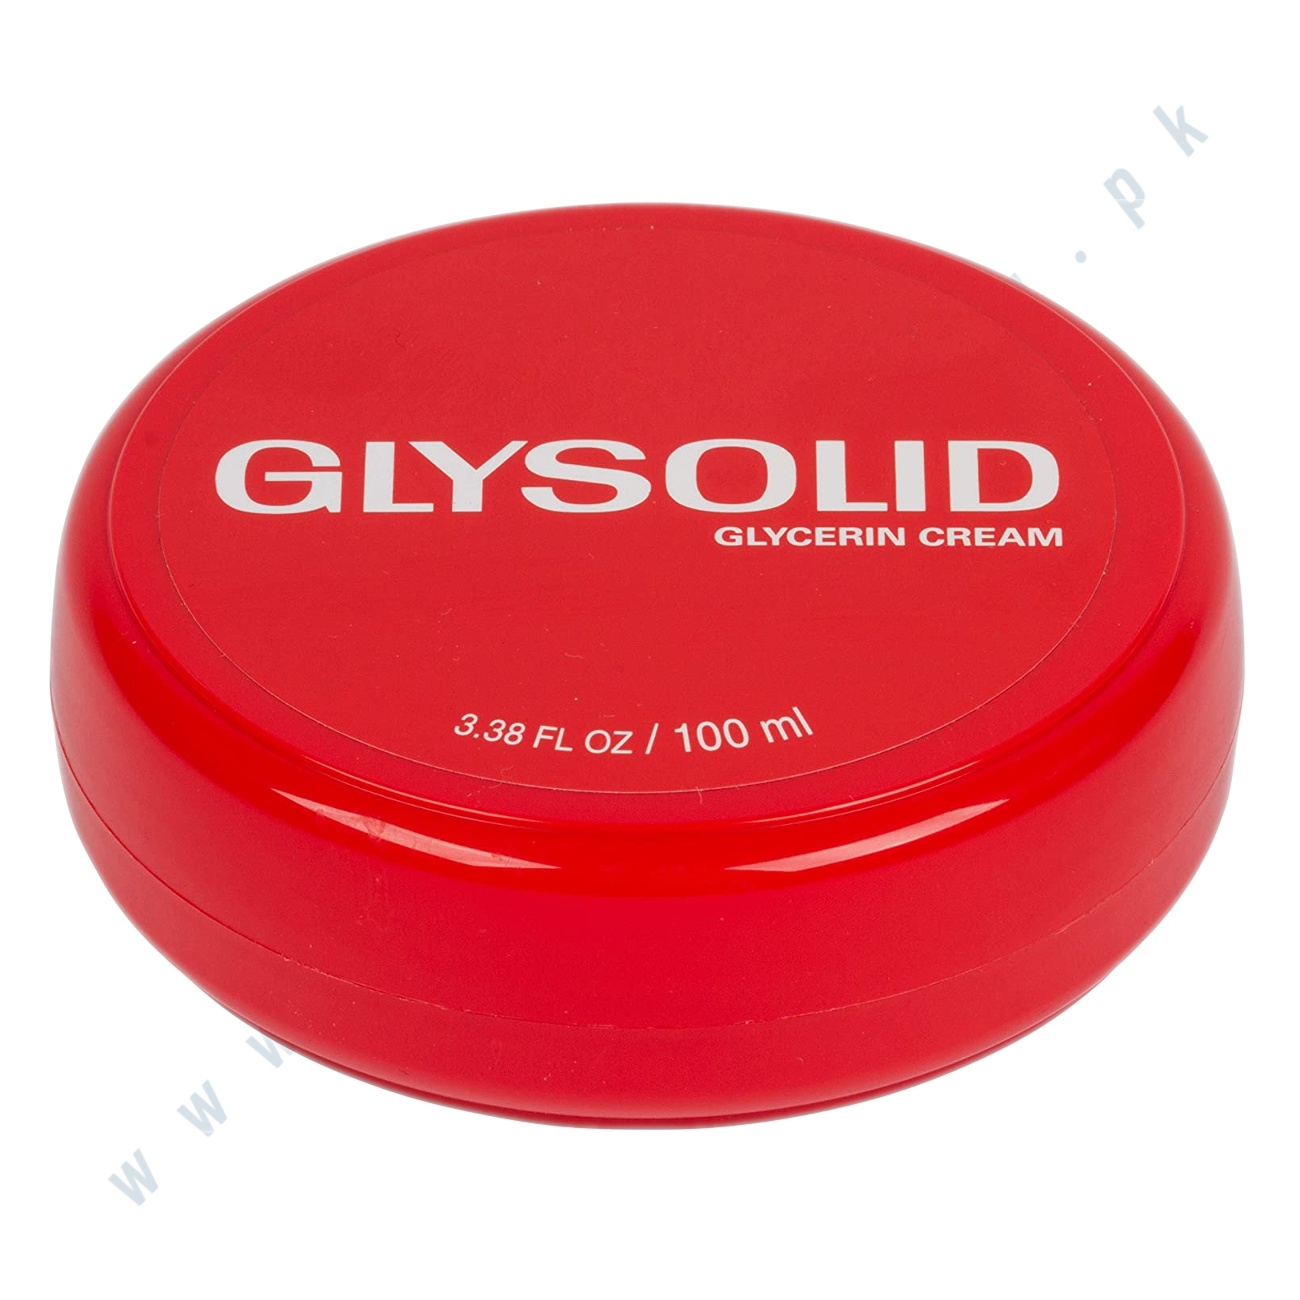 Glysolid Glycerin Skin Cream: The Trusted Formula for Smooth and Silky Skin